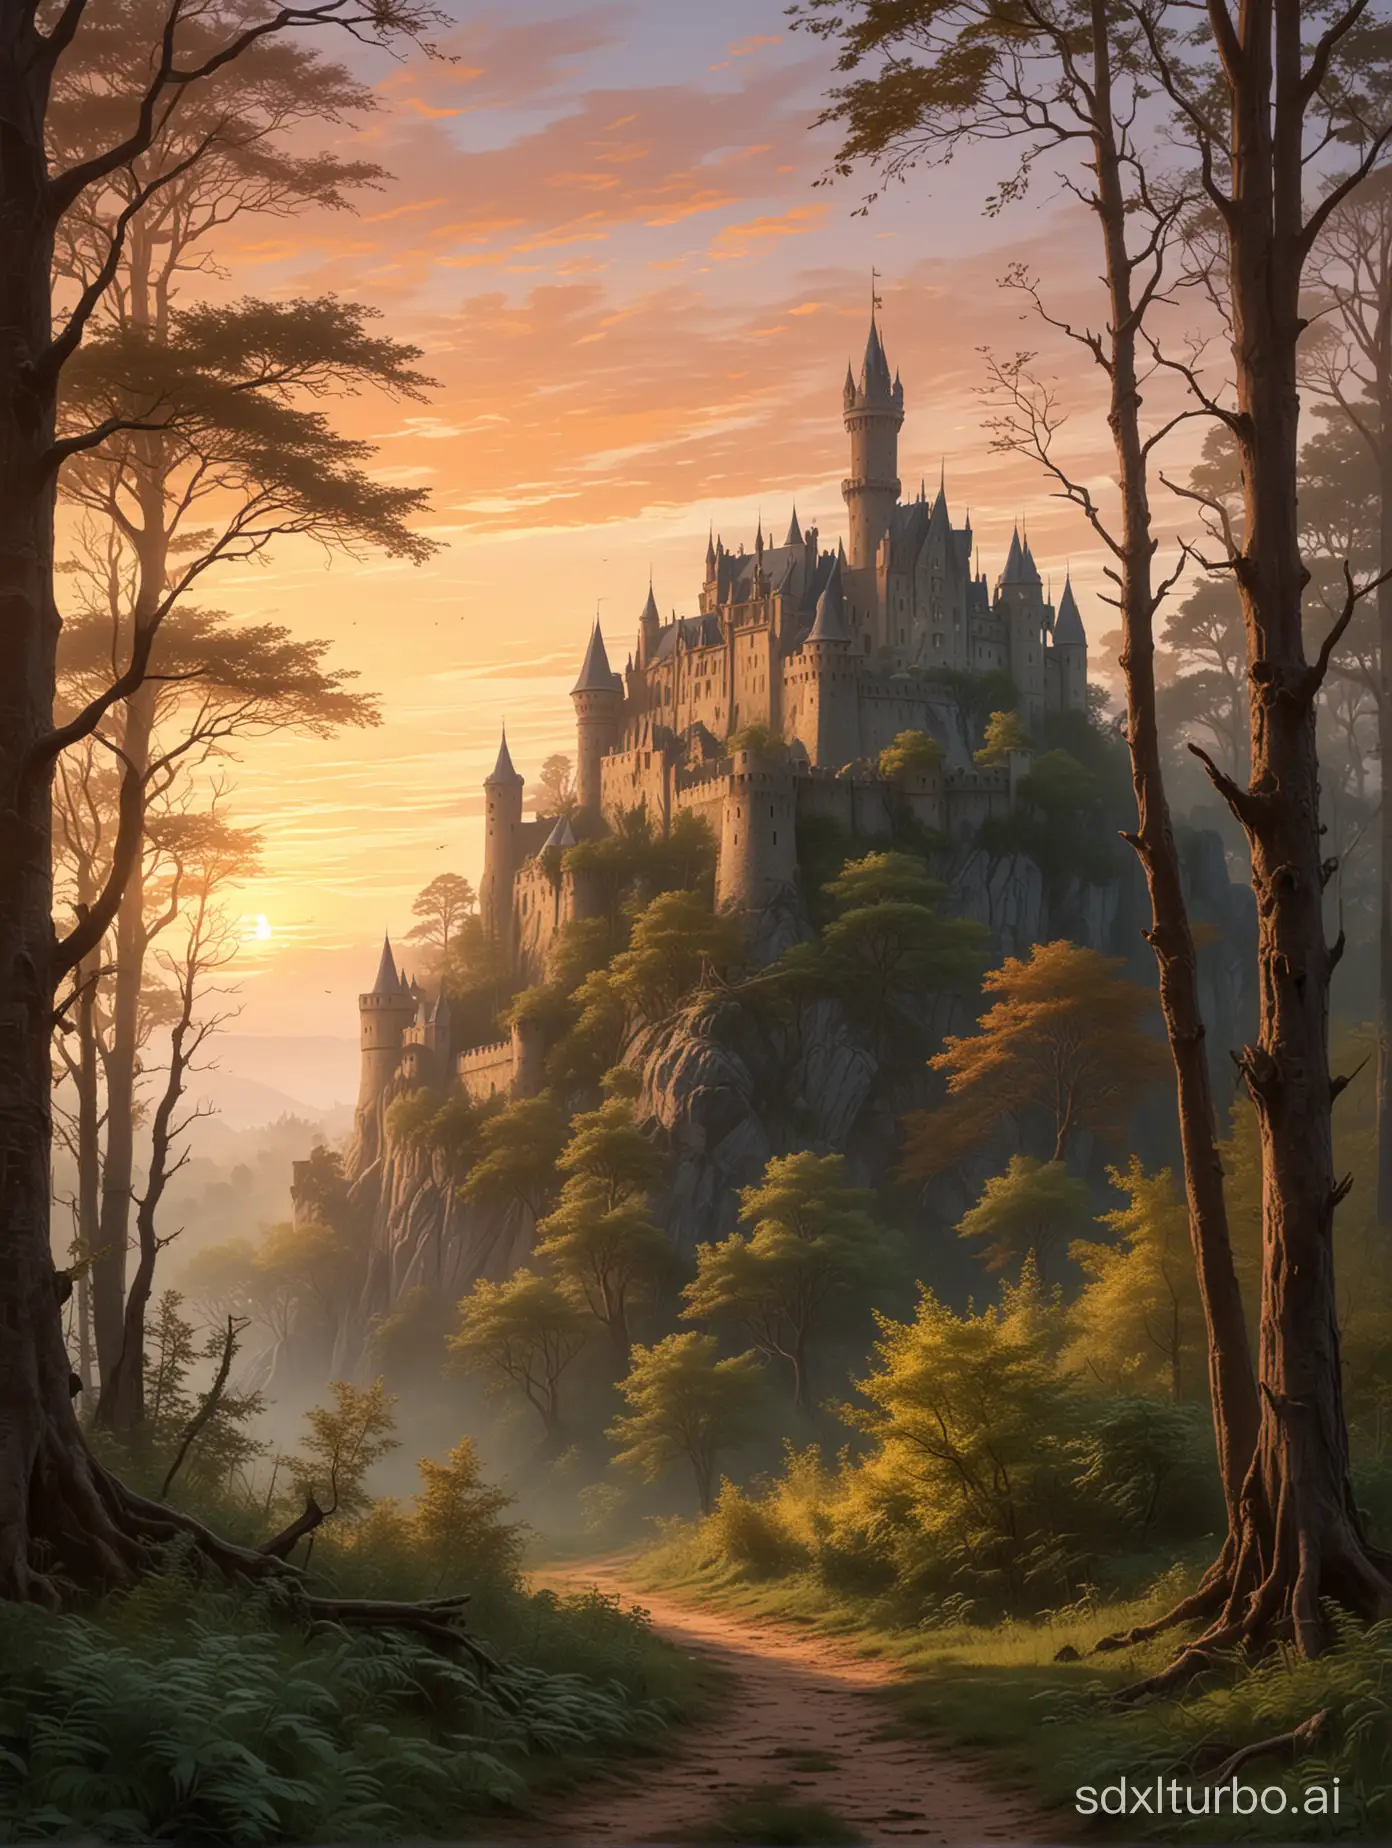 Enchanting-Sunrise-in-Mysterious-Forest-with-Ancient-Castle